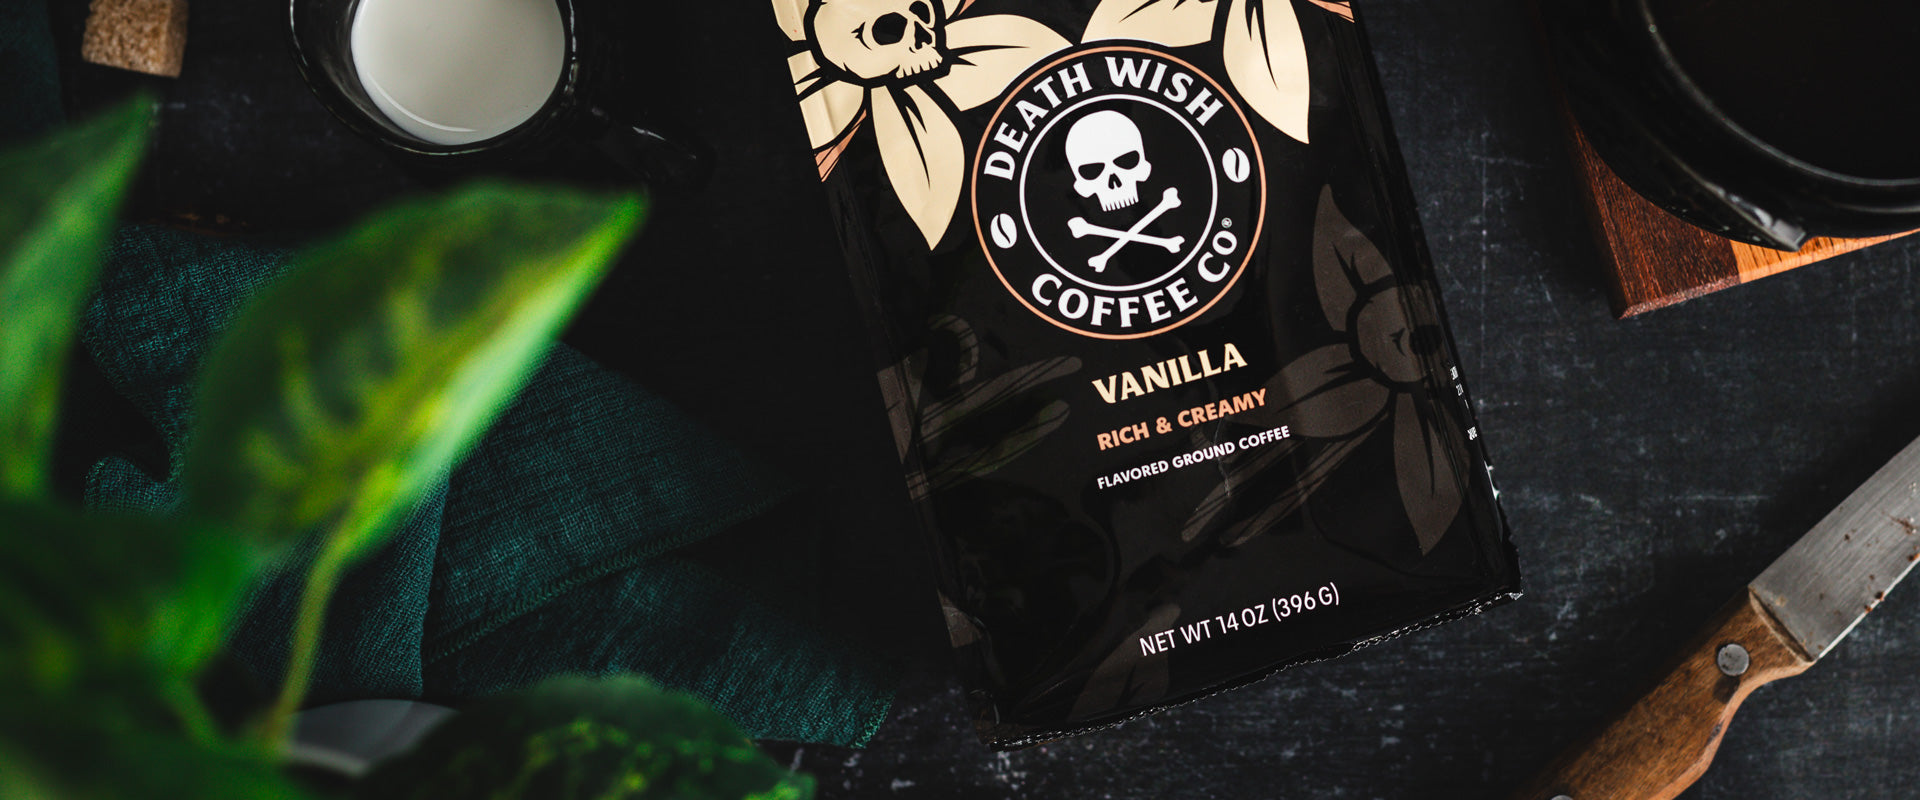 Vanilla Flavored Death Wish Coffee waiting to be brewed.